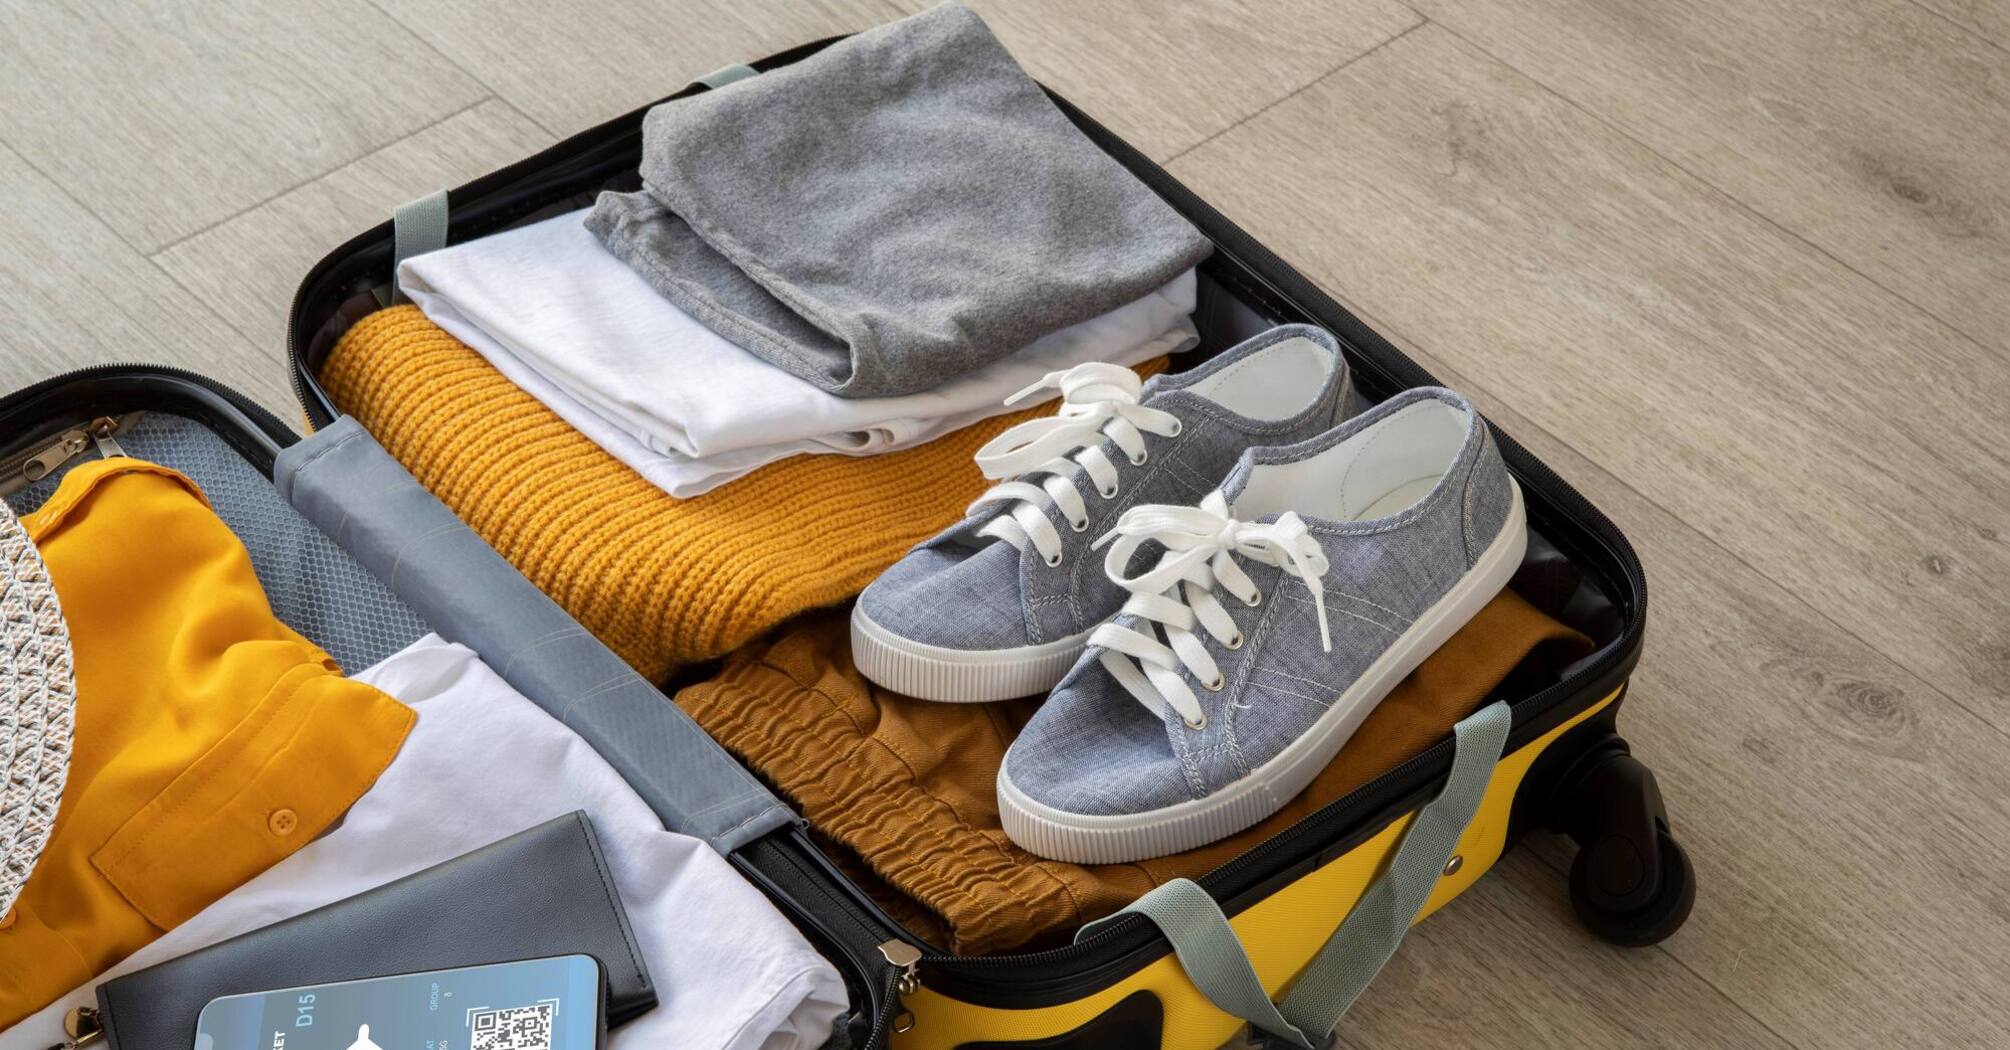 Secrets of a memorable journey: what to pack in your suitcase